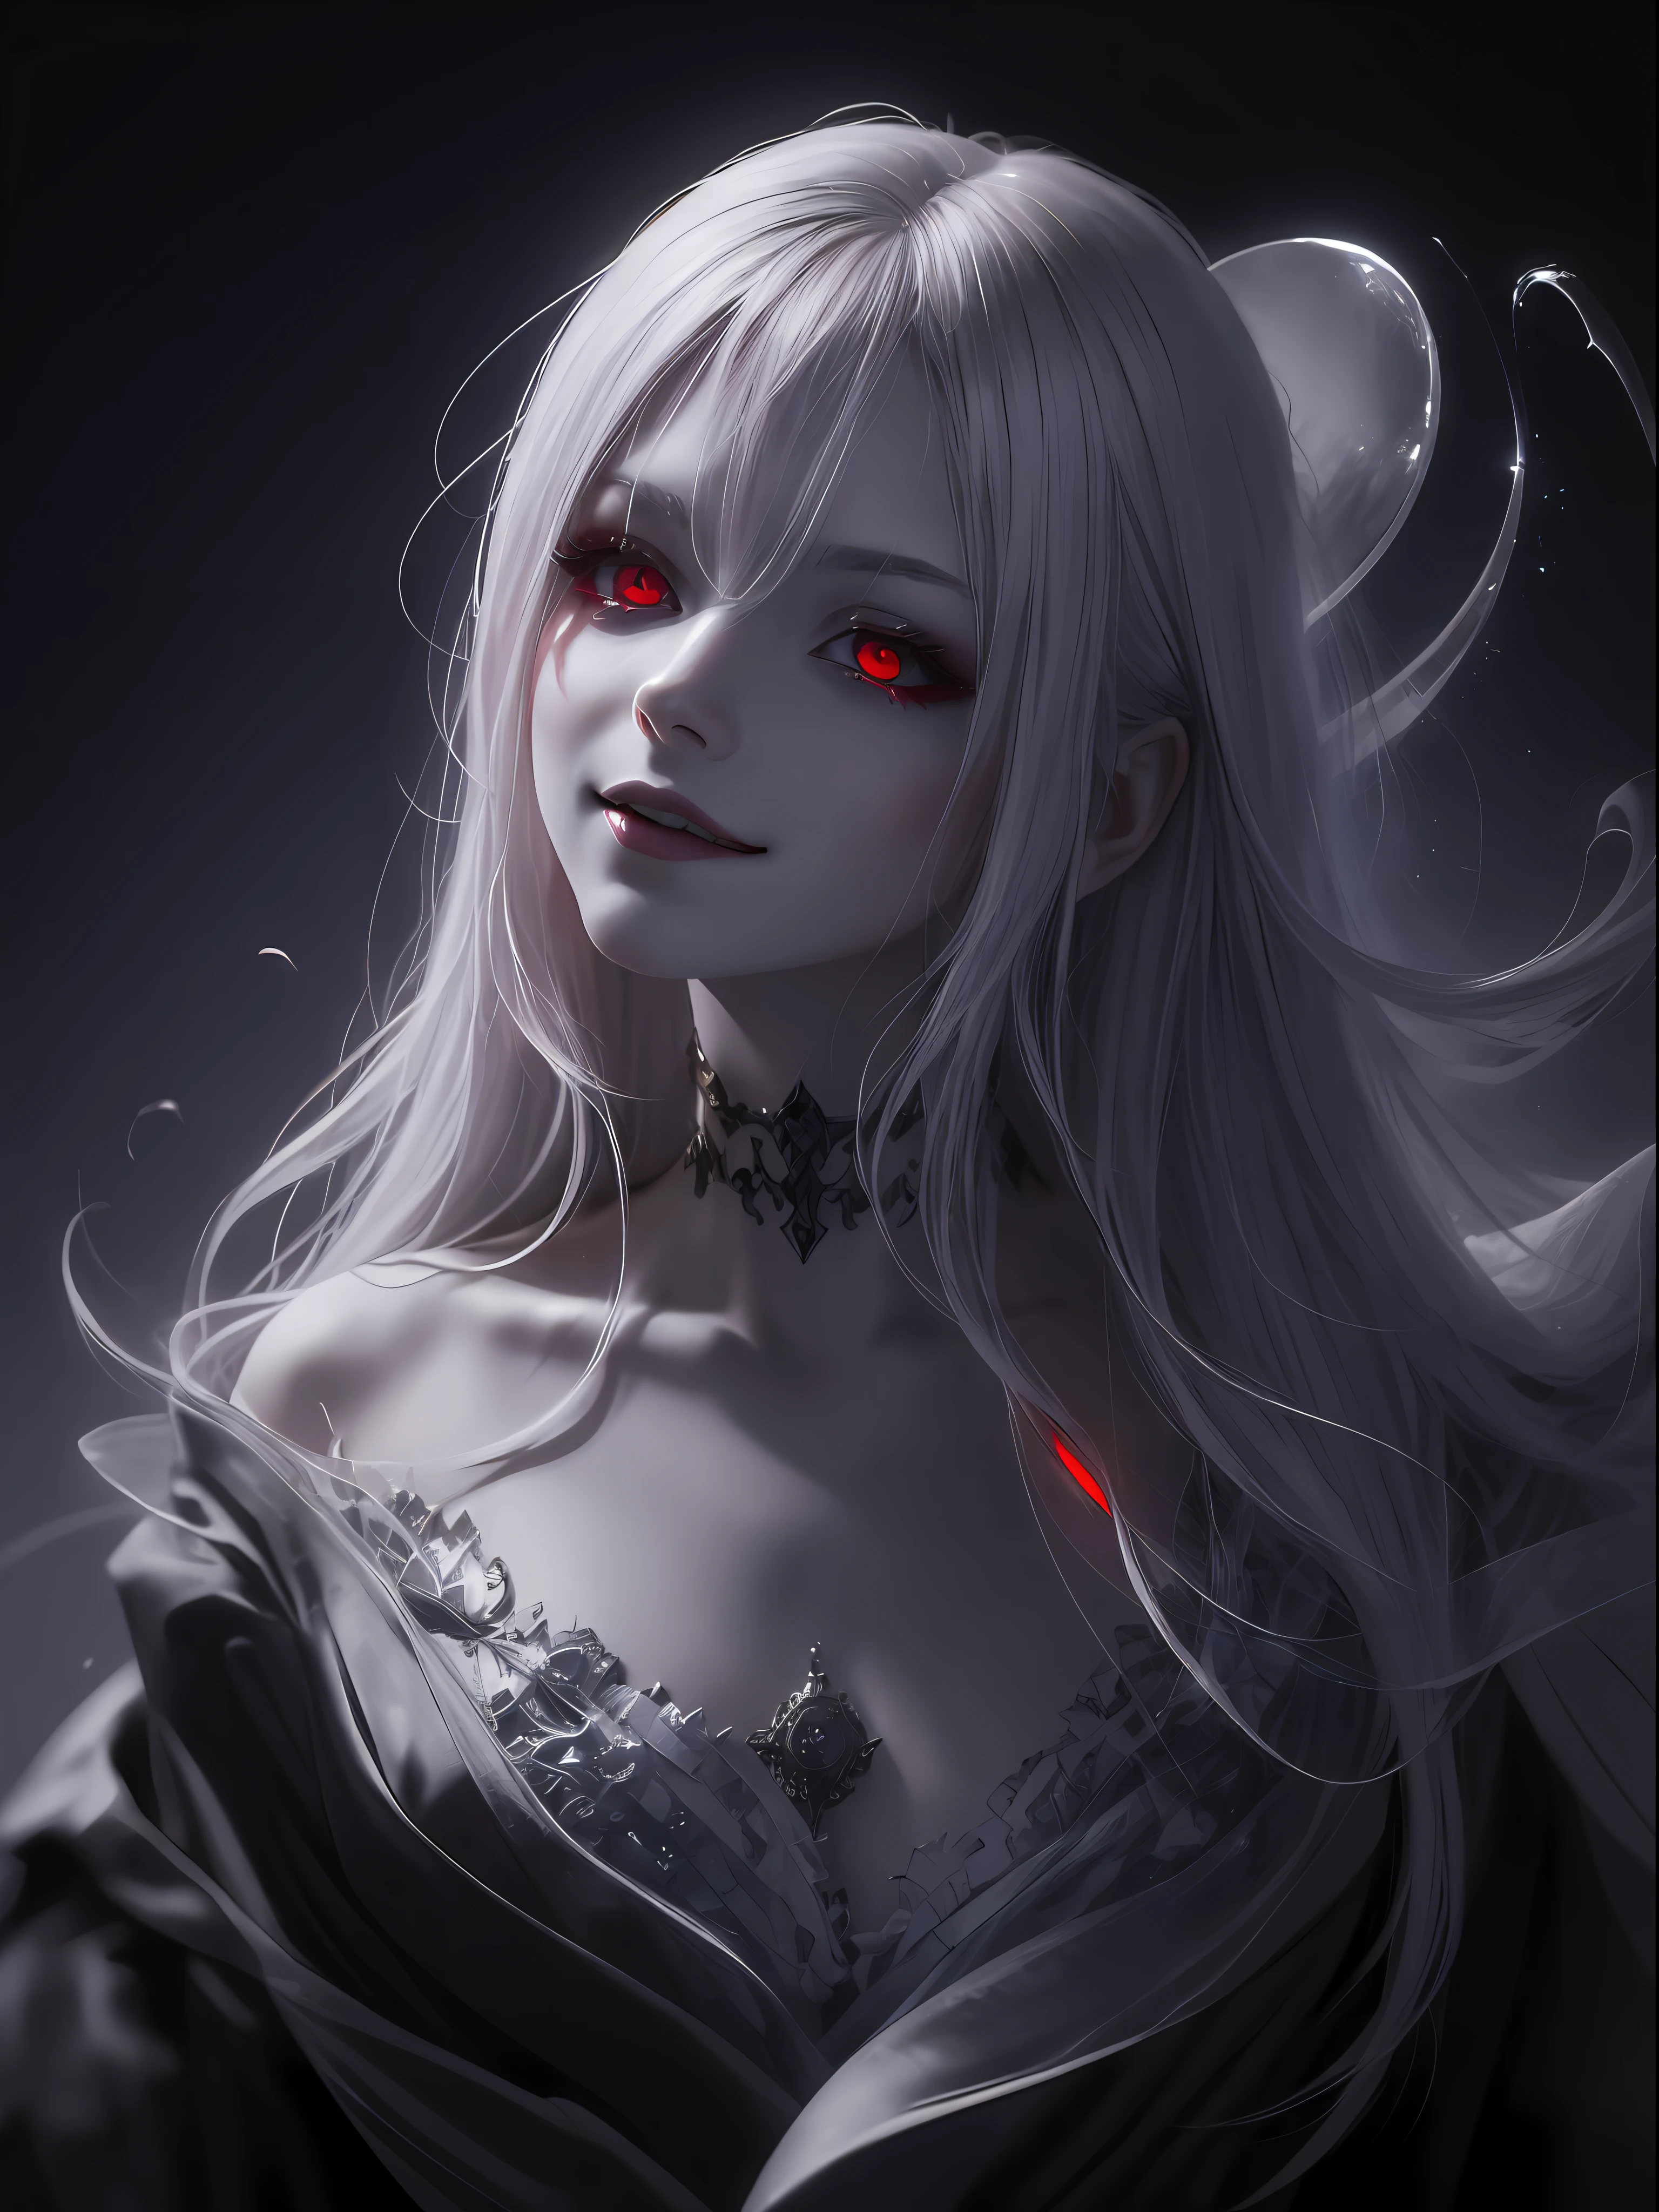 (evocative, mesmerizing, ethereal atmosphere),(red eyes with a malicious gleam, porcelain skin, mischievous grin)